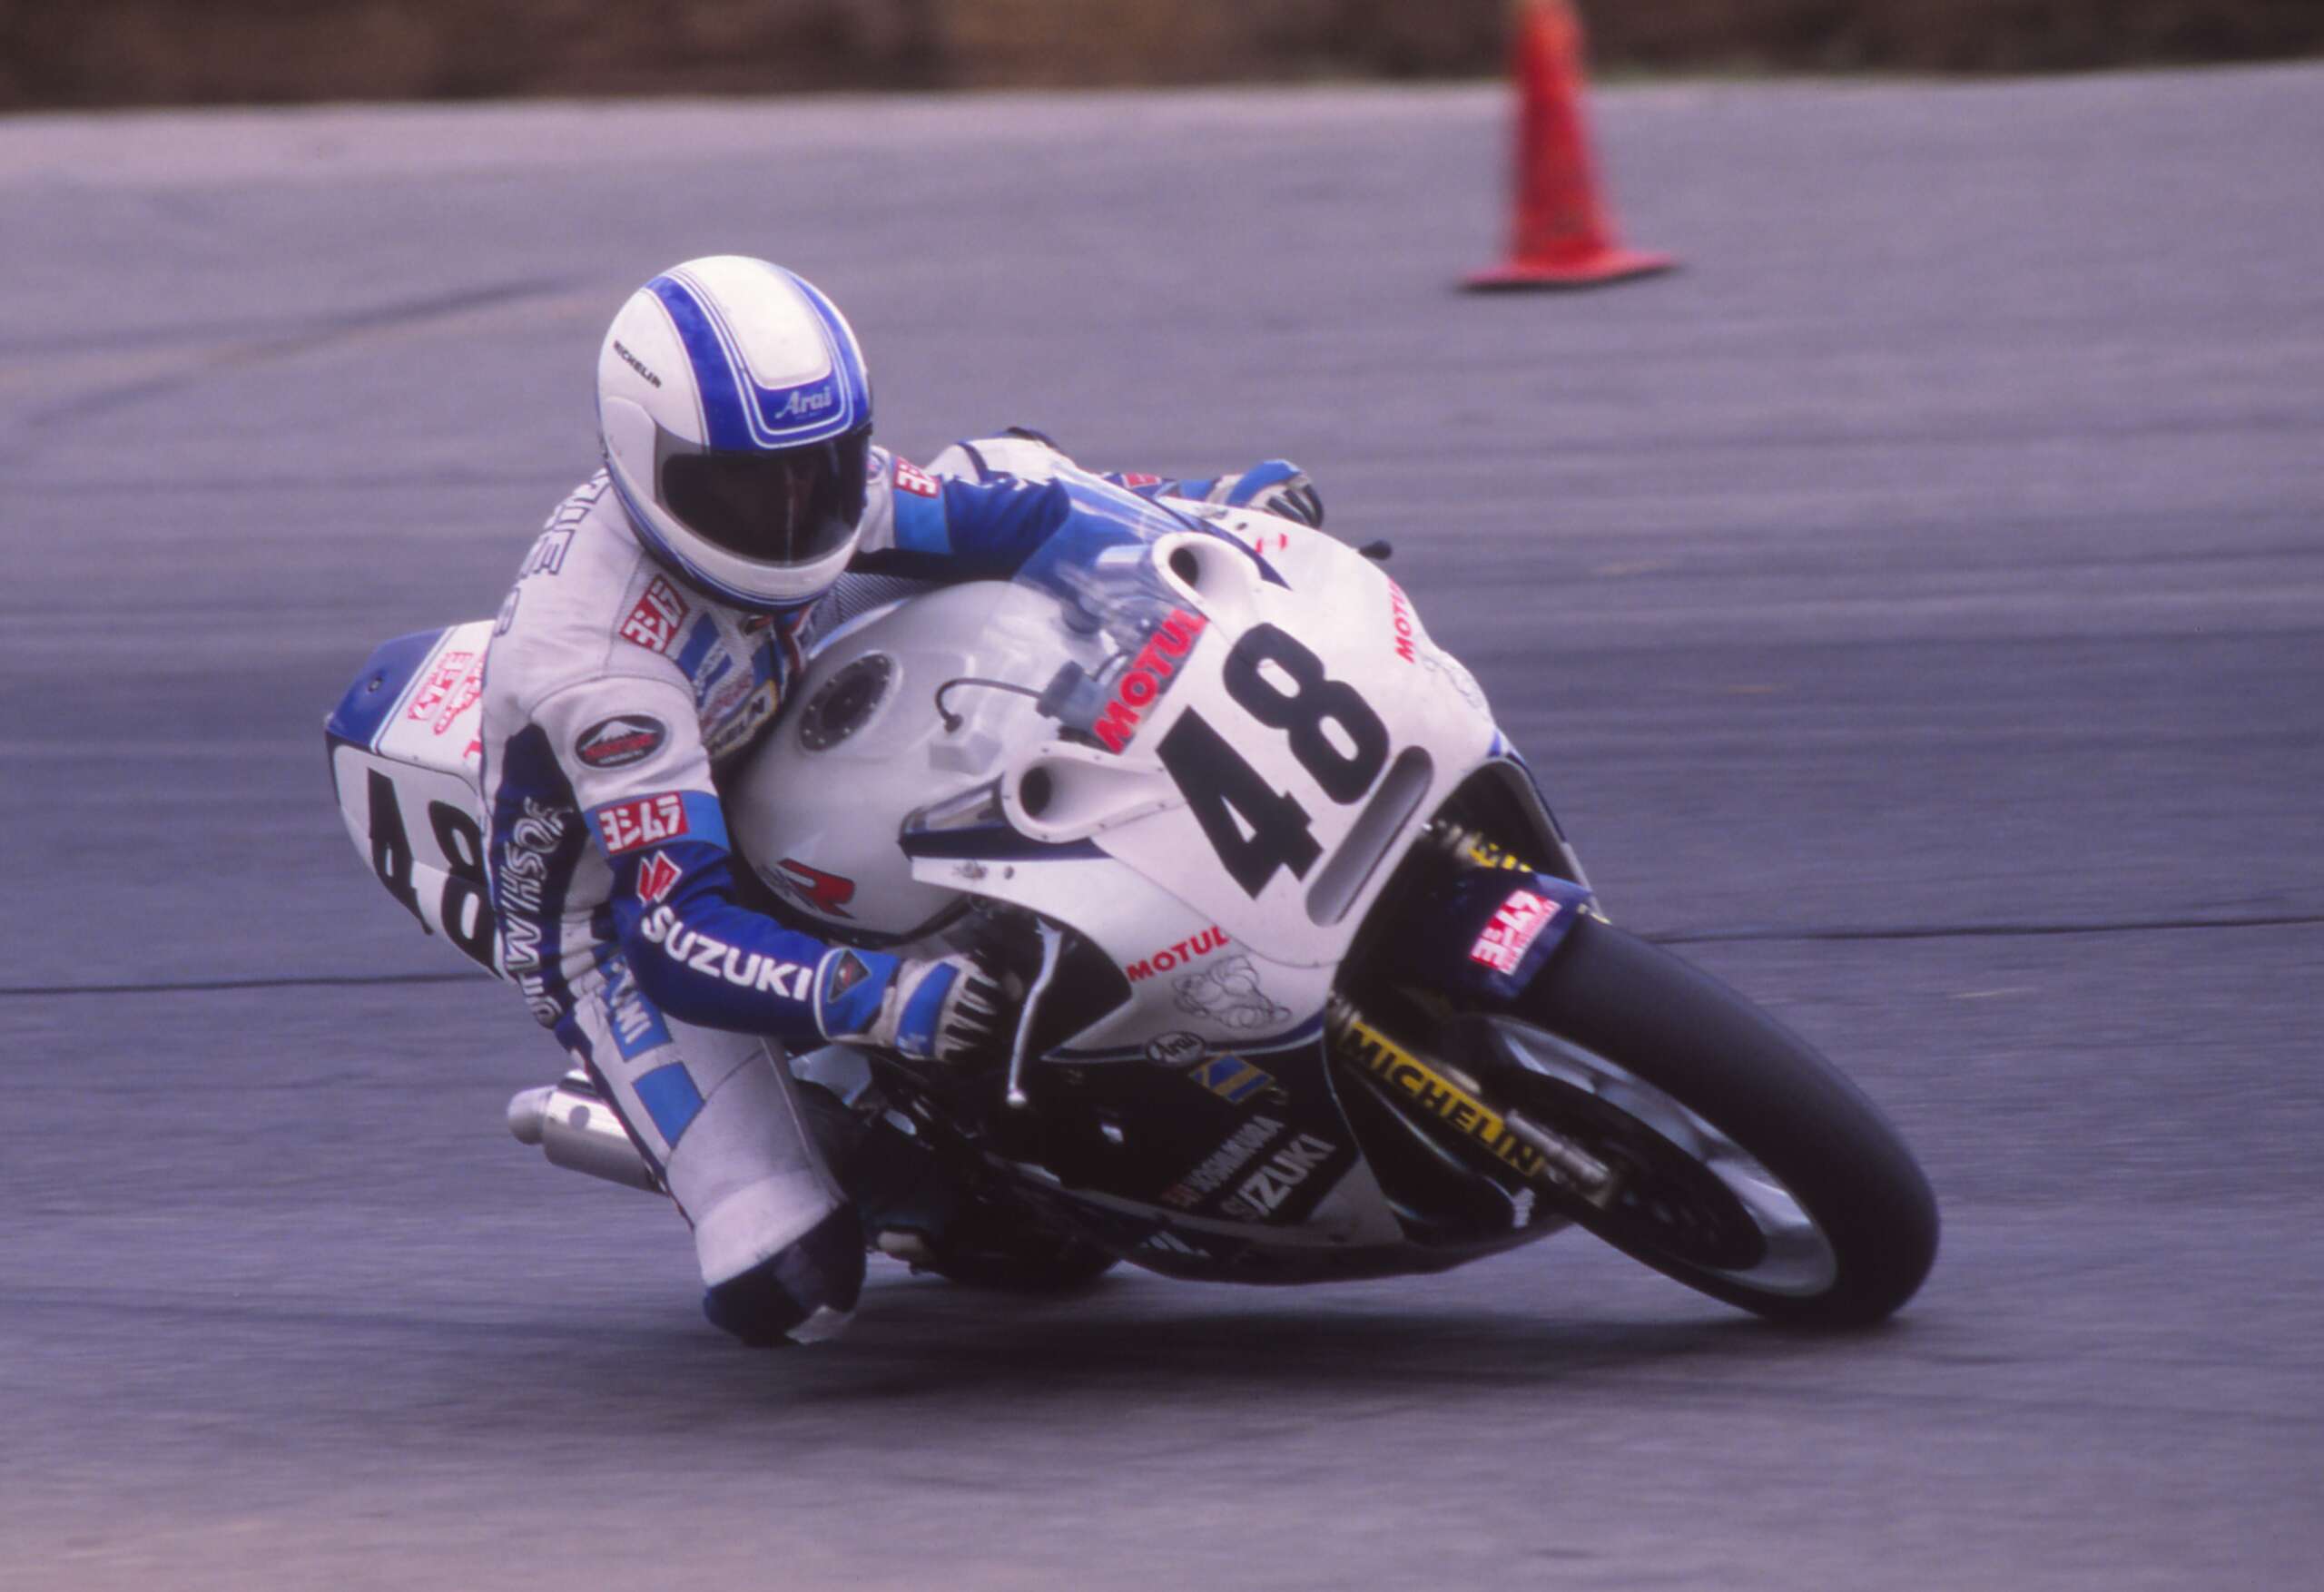 21 In ’21: Jamie James, The Slow-Talking, Fast-Riding Superbike Champion